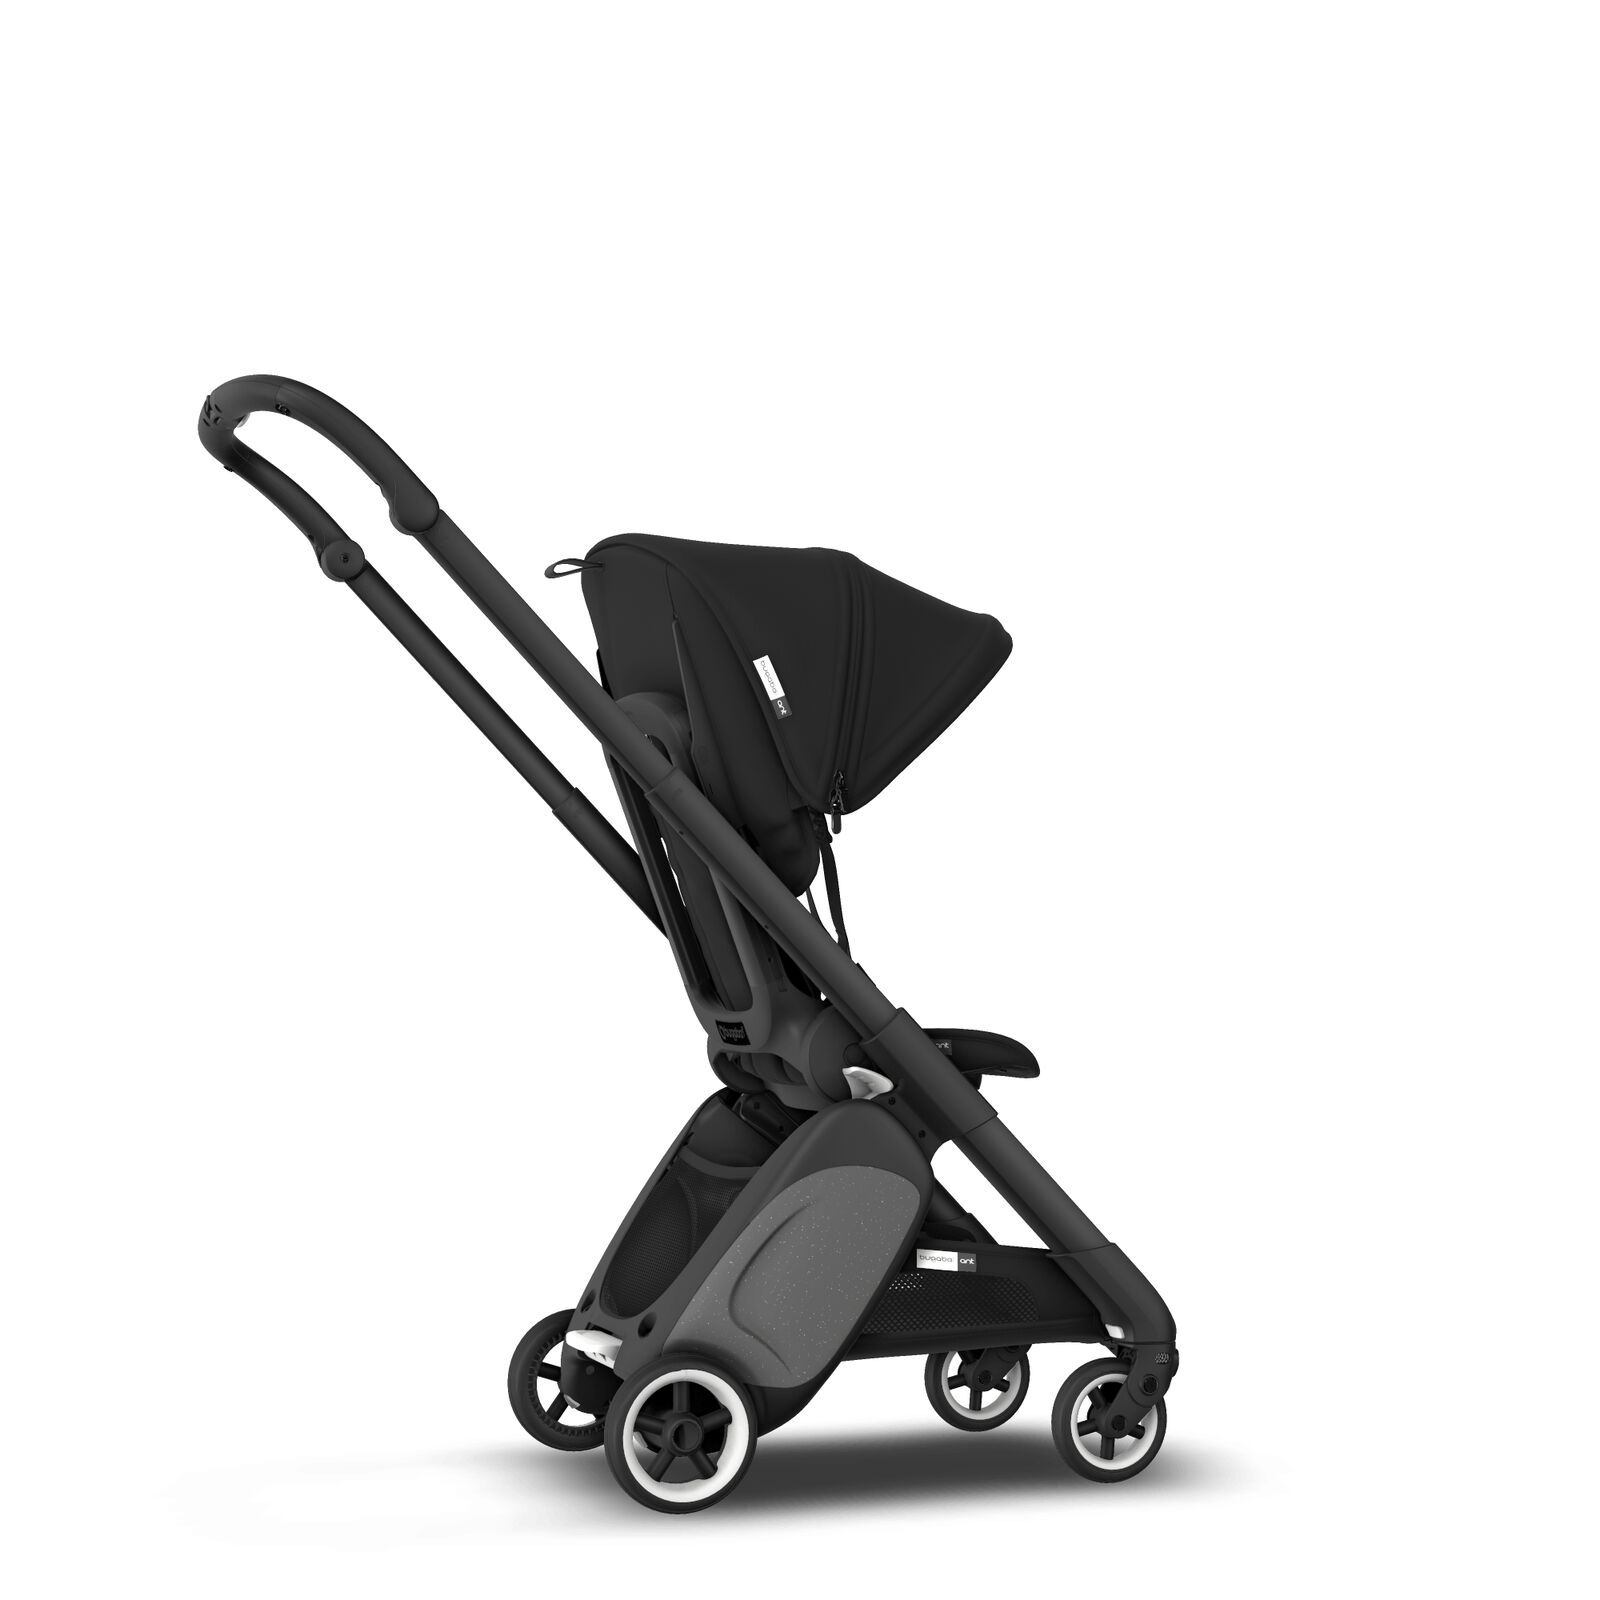 Bugaboo Ant ultra compact stroller - View 6